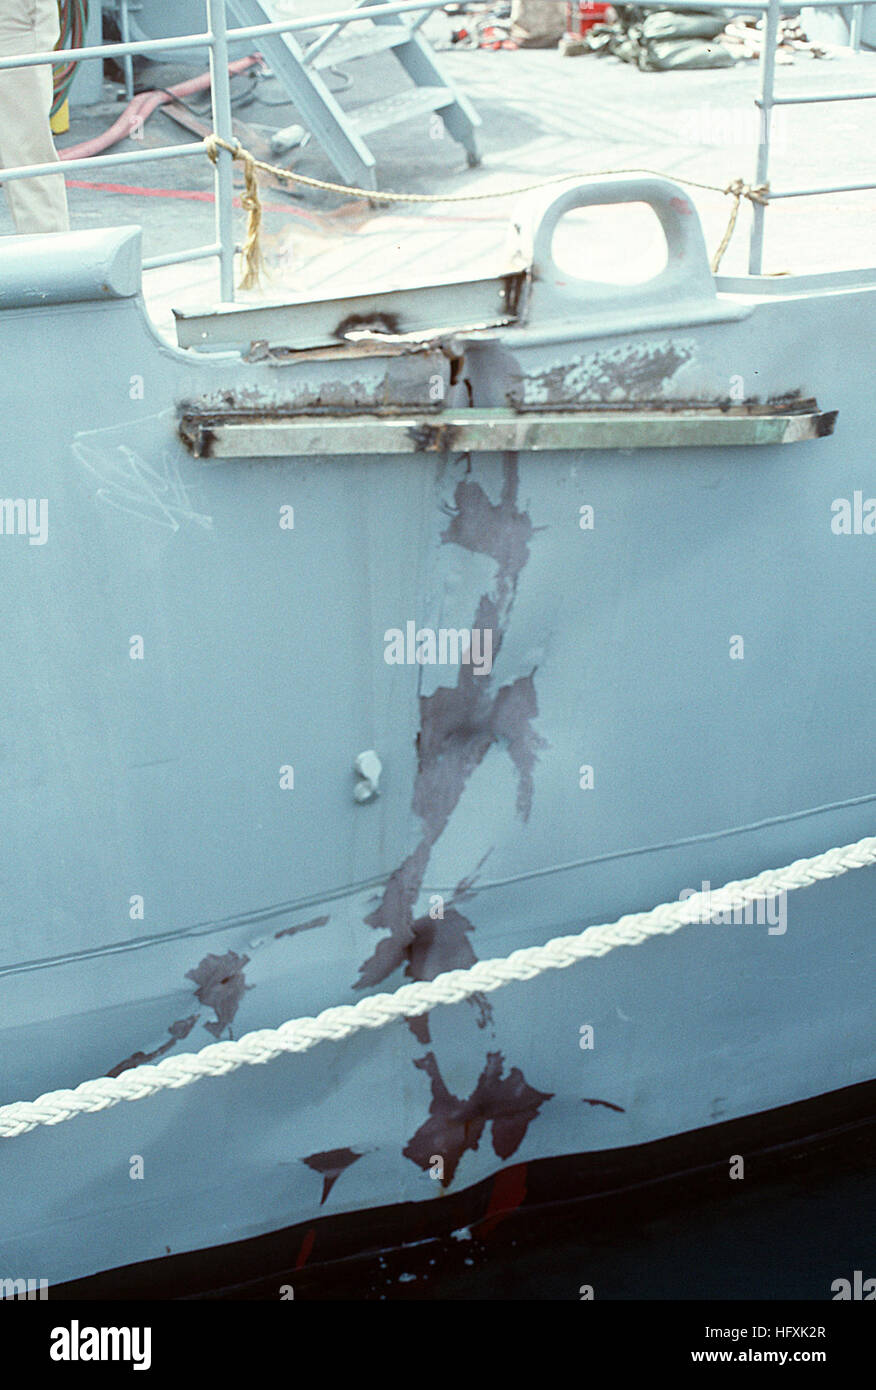 A close-up view of a crack in the hull of the Aegis-guided missile cruiser USS PRINCETON (CG-59), part of the damage sustained when the vessel struck an Iraqi mine while on patrol in the Persian Gulf on February 18th in support of Operation Desert Storm.  The incident resulted in the injury of three crew members and also inflicted propeller damage on the ship, however, the Princeton was still able to navigate and operate its weapons systems. USS Princeton (CG-59) hull crack Stock Photo